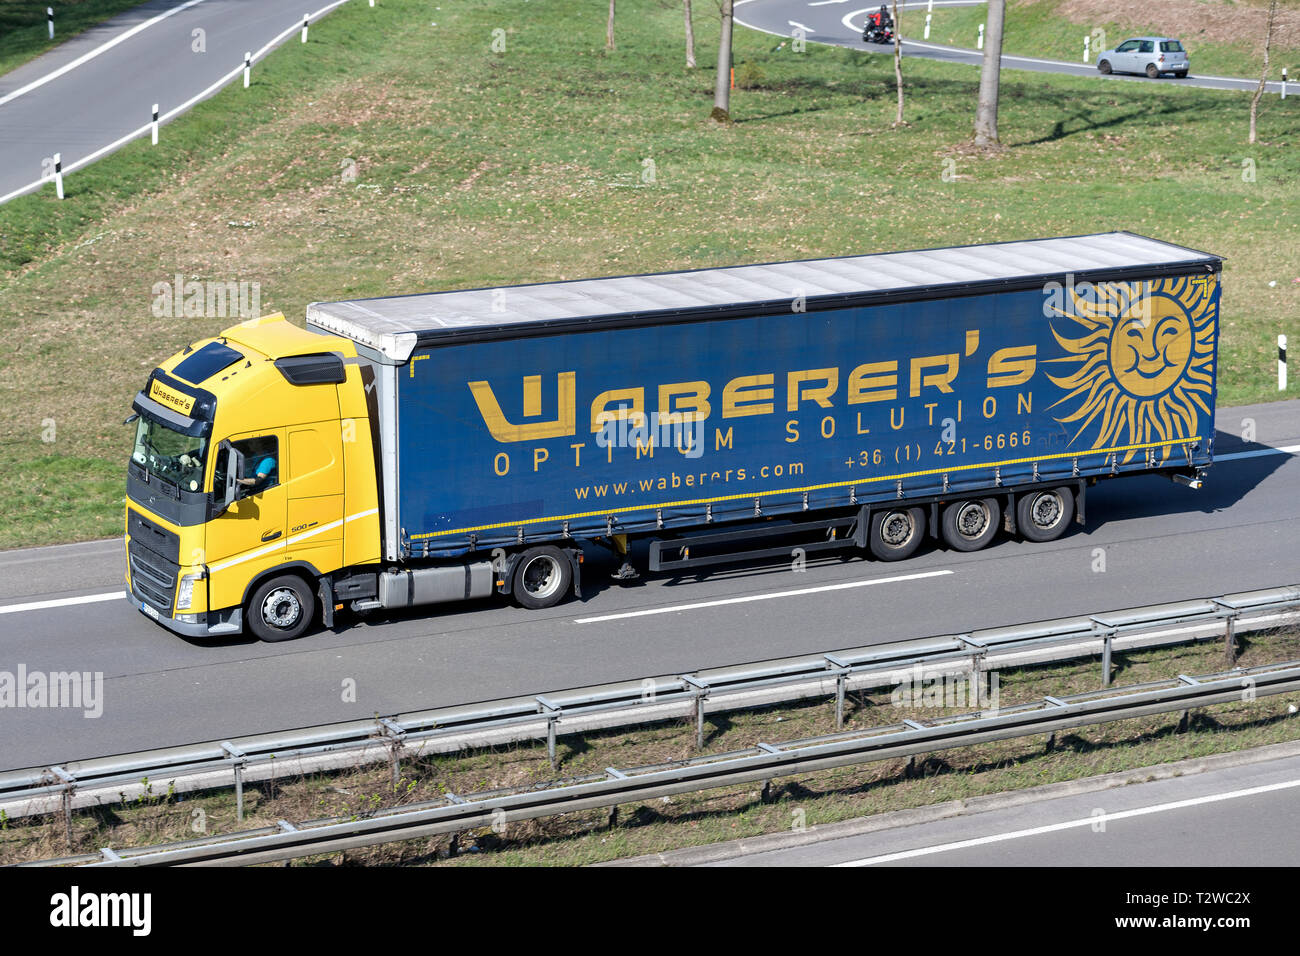 Waberer’s truck on motorway. With a fleet of over 4,300 trucks and around 7,600 employees, Waberer’s serves customers across 28 countries in Europe. Stock Photo